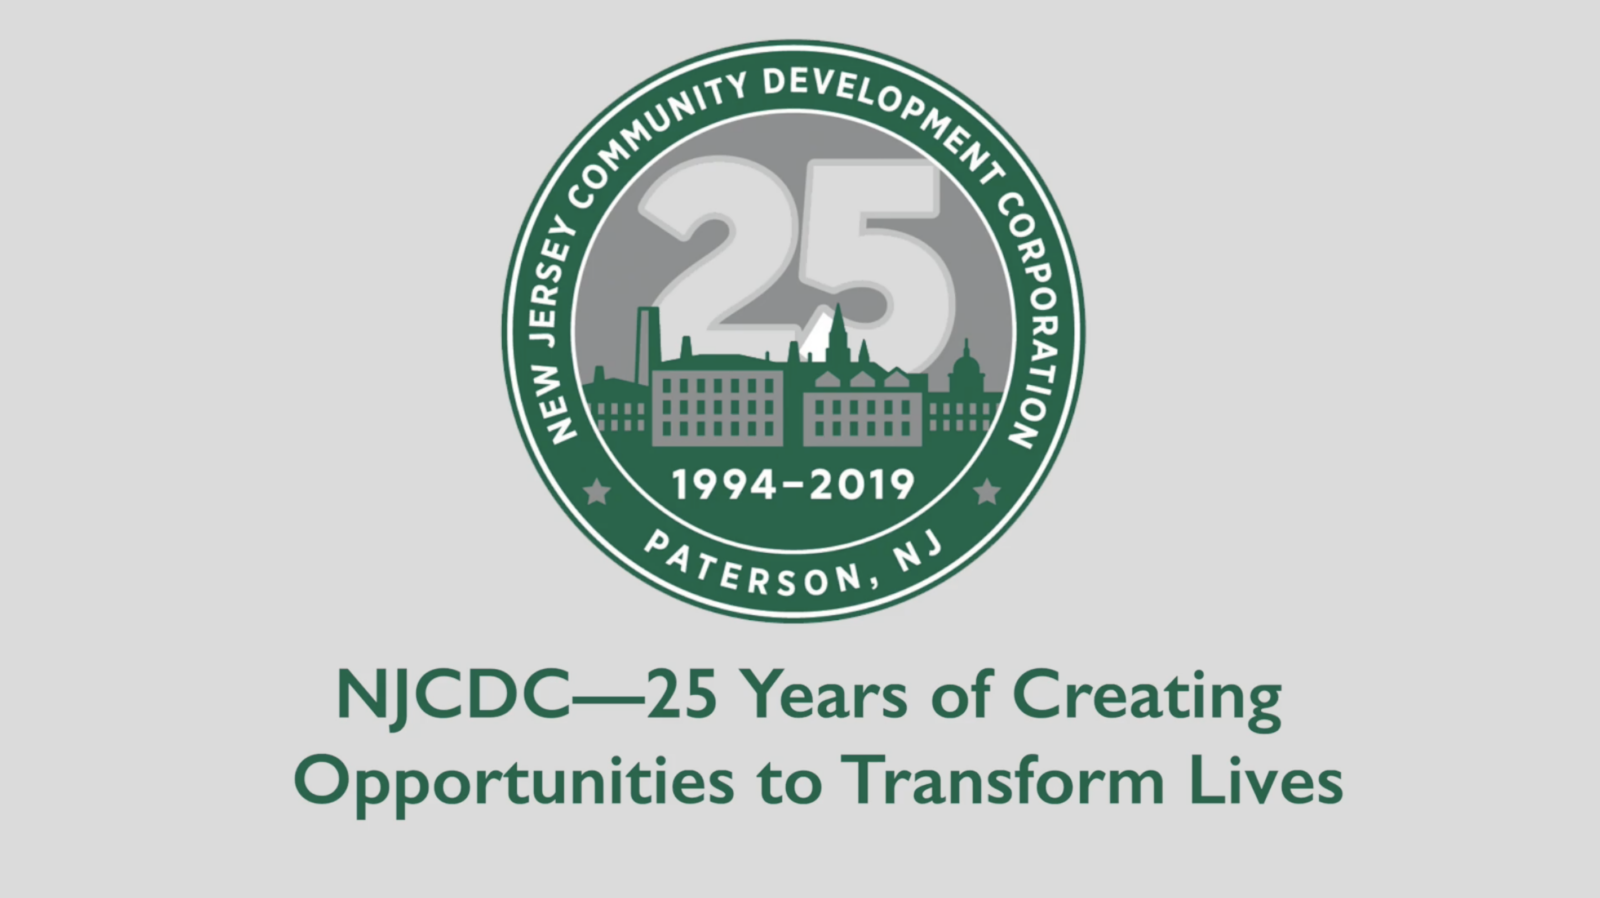 NJCDC - 25 years of creating opportunities to transform lives